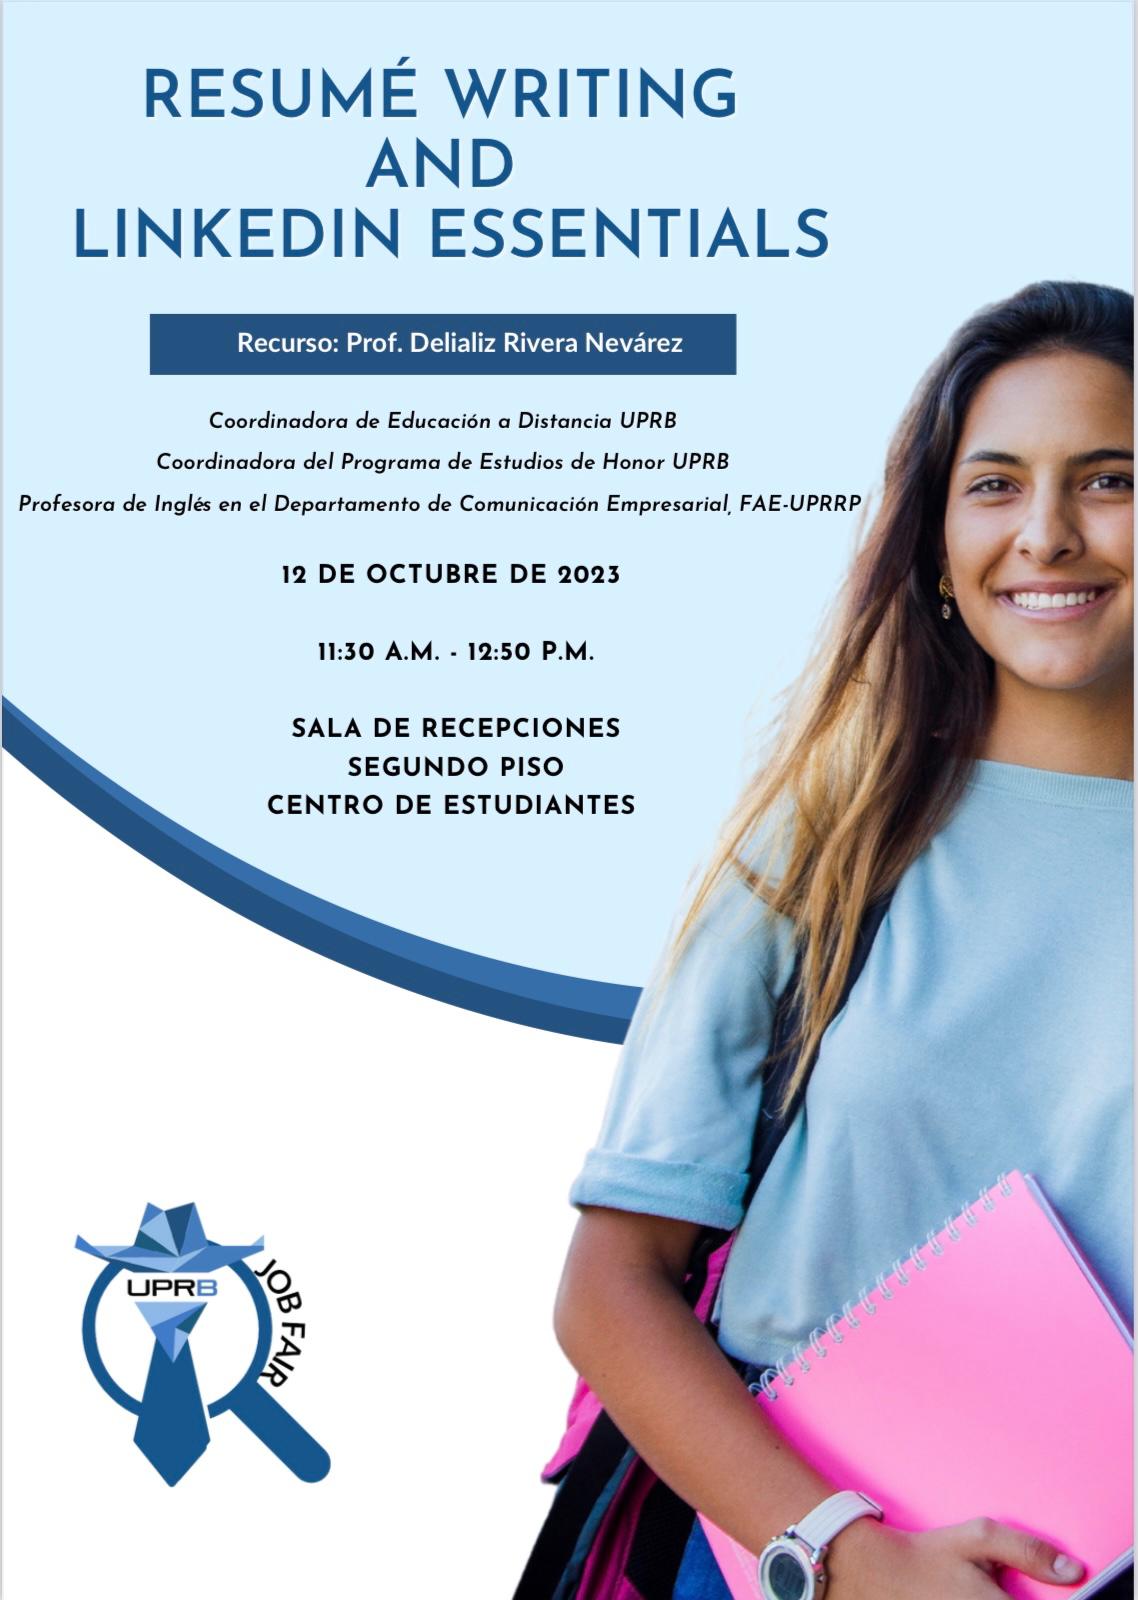 RESUME WRITING AND LINKEDIN ESSENTIALS promotion